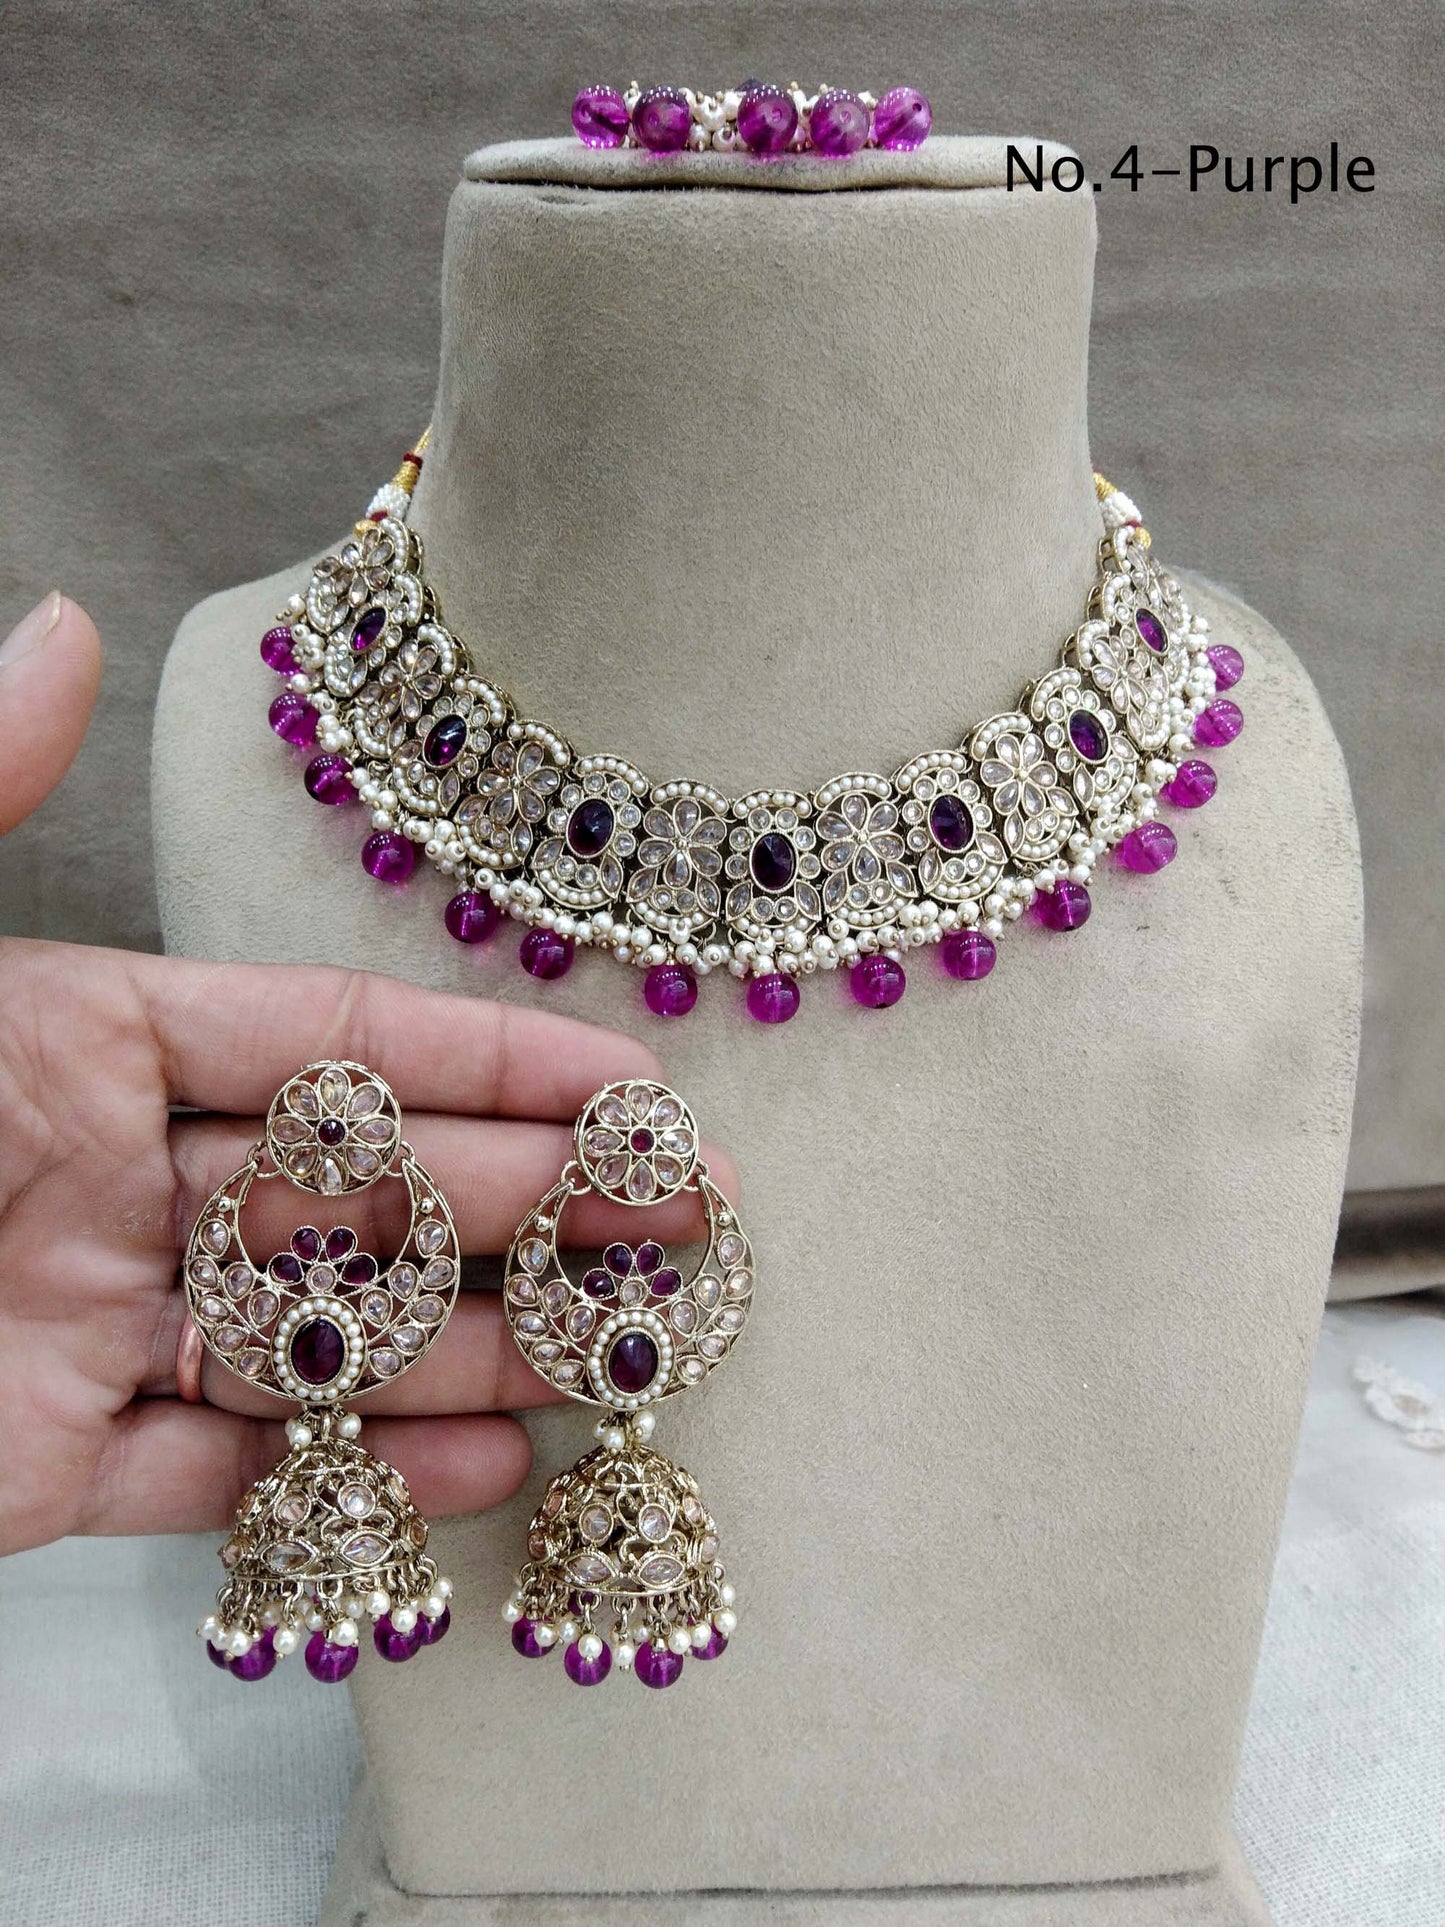 Indian Jewellery Necklace Set /Indian Antique gold purple necklace set/Bridesmaid keeps Jewellery/Indian jewellery Set